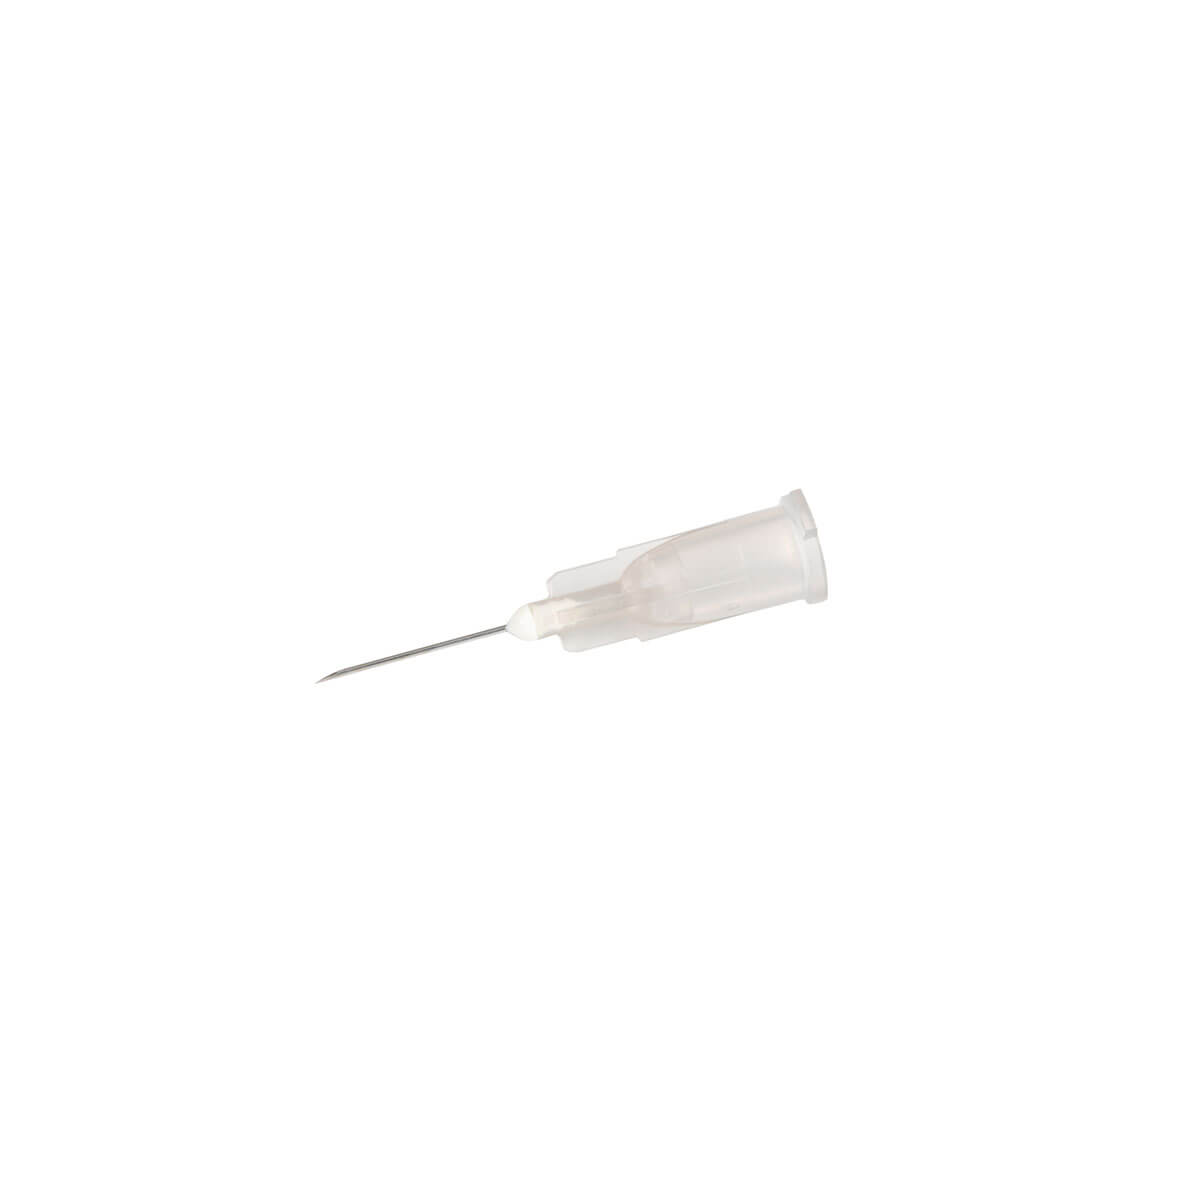 Neopoint Needle Grey 27G 12MM